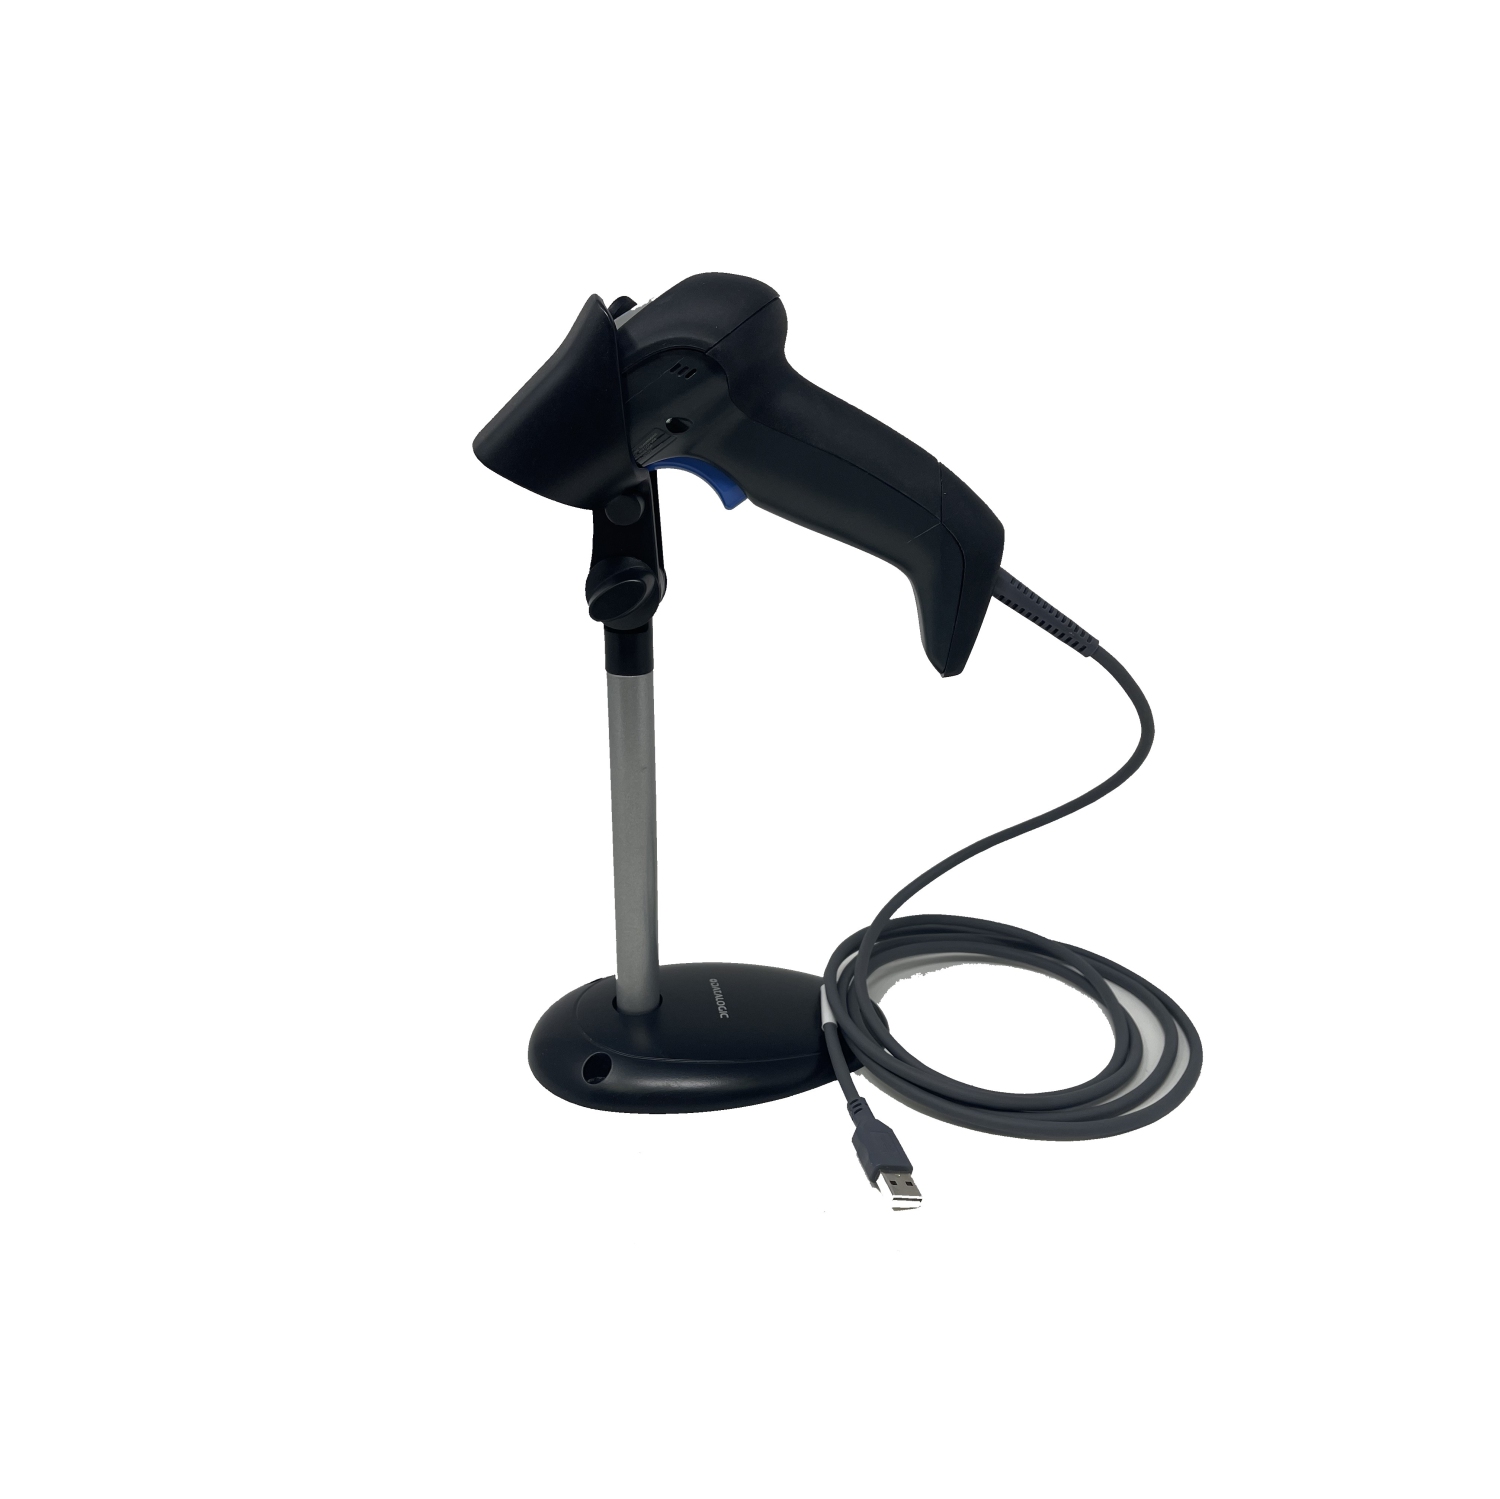 Refurbished (Good) - DATALOGIC GD4130-BK BARCODE SCANNER With Cable and  STAND